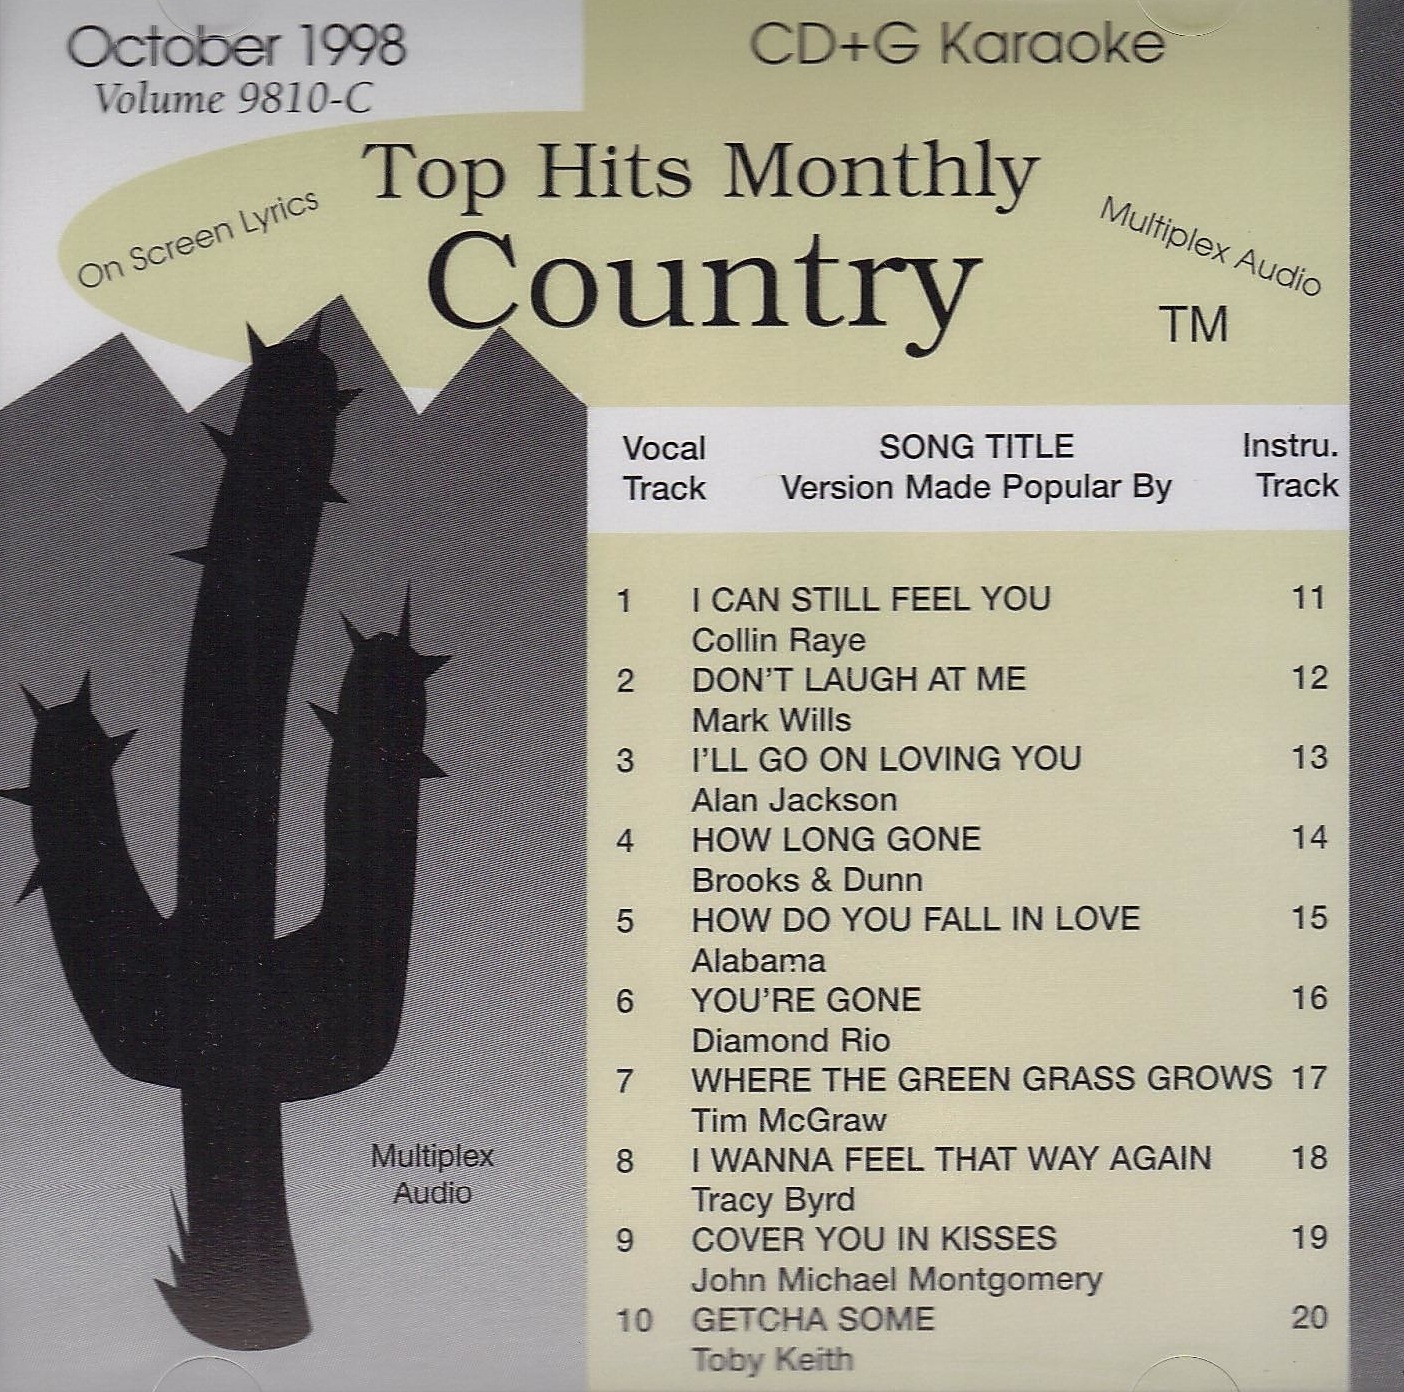 Top Hits Monthly THC9810 - Country October 1998